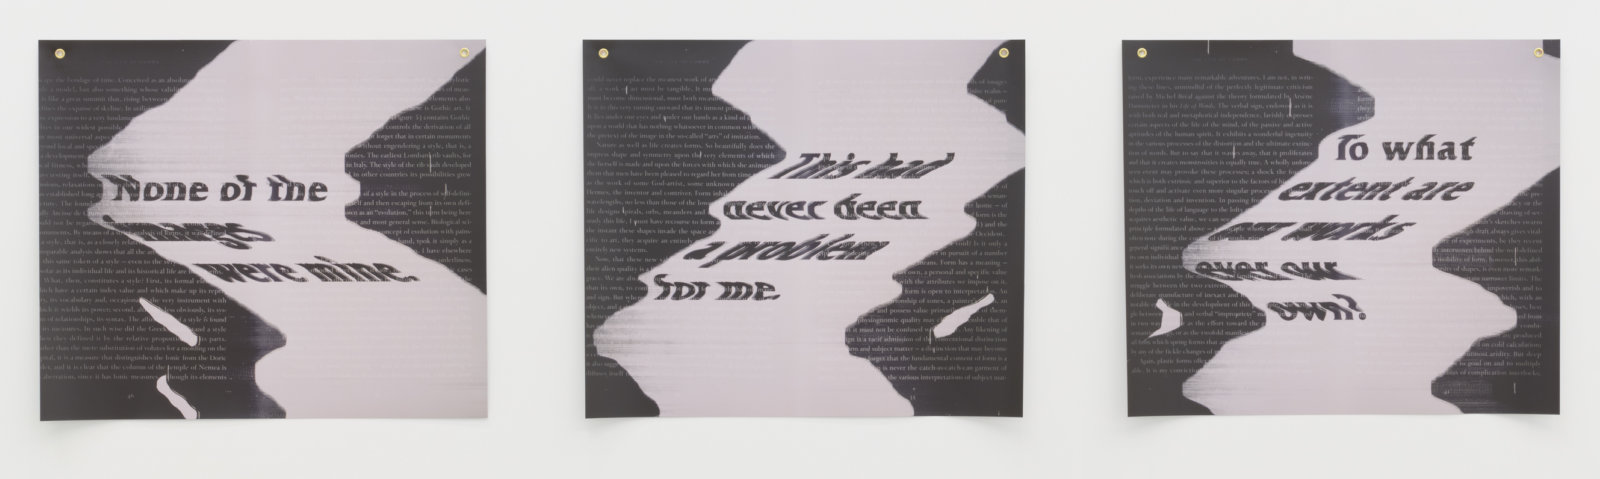 Raymond Boisjoly, After Some Imbalance, After Henri Focillon (“…escape the bondage of time.”/“…could never replace the meanest work of art.”/“…form, experience many remarkable adventures.”), 2021 solvent-based inkjet print on vinyl, grommets 3 parts, each 36 x 42 in. (91 x 107 cm), 36 x 144 in. (91 x 366 cm) installed